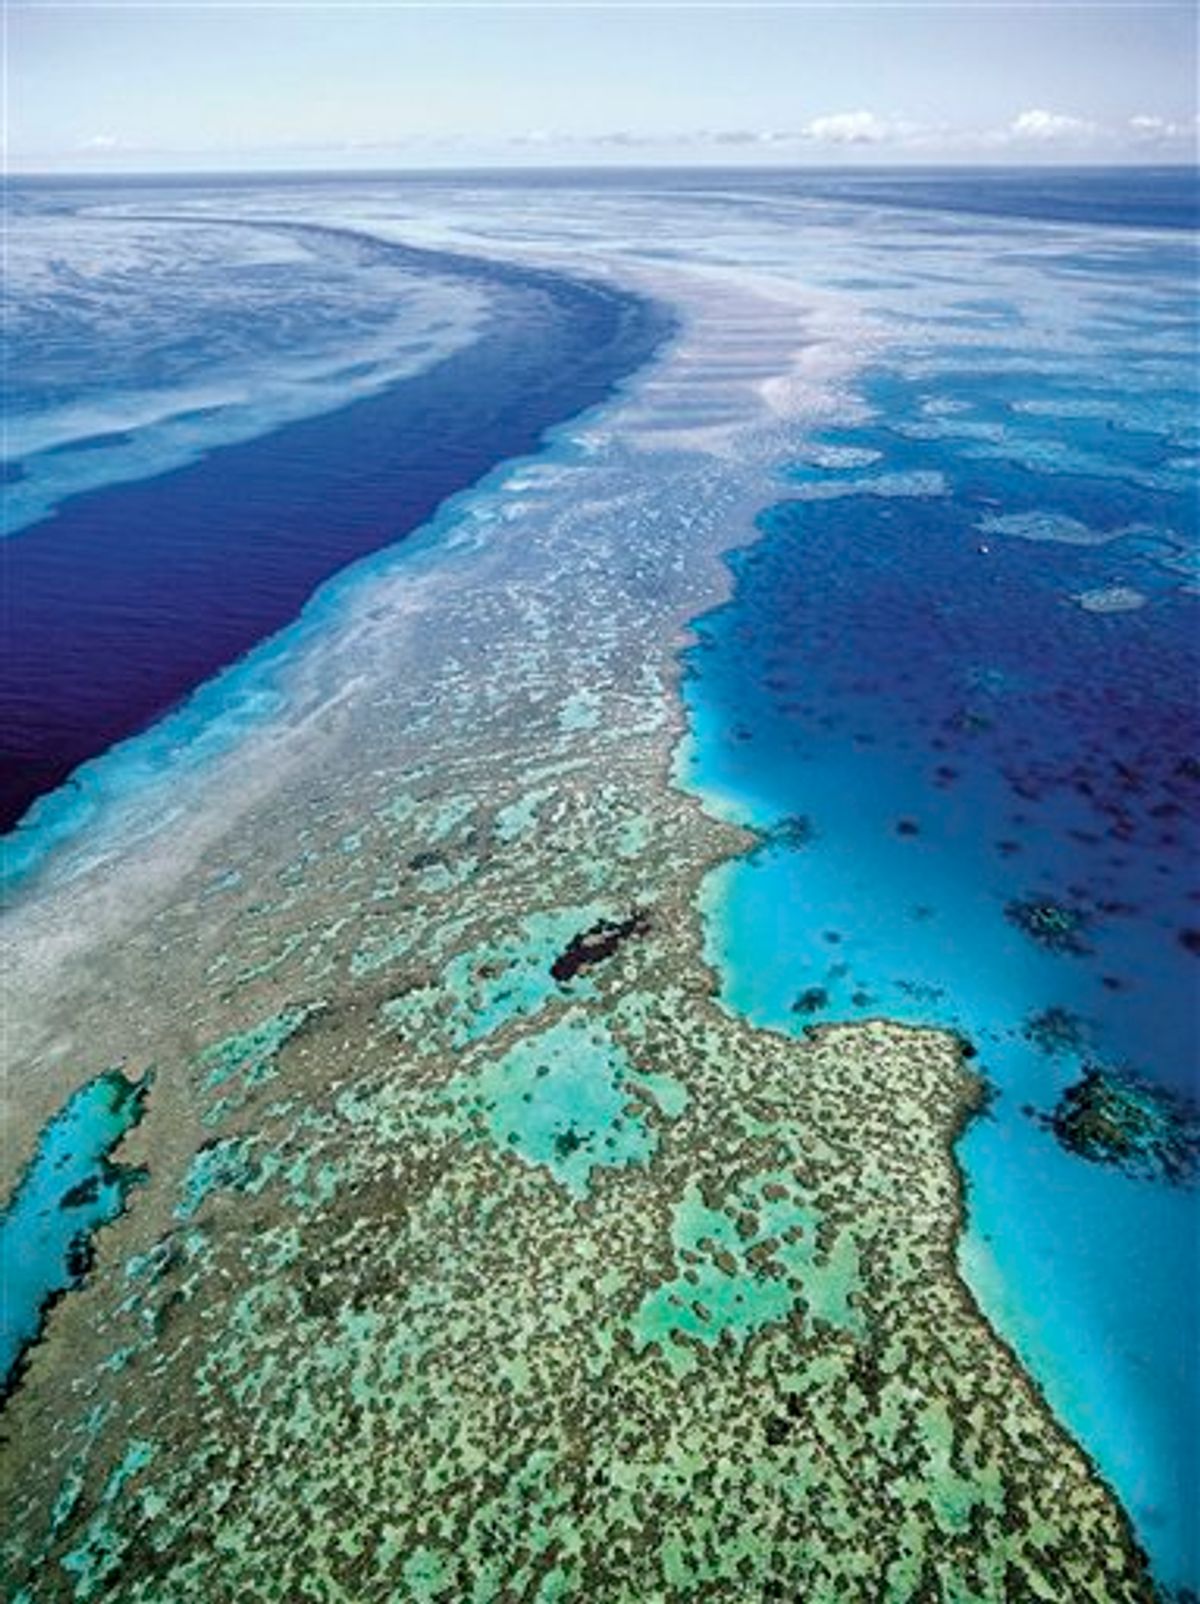 FILE - In this Sept. 2001 file photo provided by Queensland Tourism, the Great Barrier Reef off Australia's Queensland state is shown in an aerial view. Researchers said it is too early to know exactly how much of the reef has been affected by recent flooding, which carved a wide path of destruction on land before draining into the sea off the country's northeast coast. (AP Photo/Queensland Tourism, File)  EDITORIAL USE ONLY  (AP)